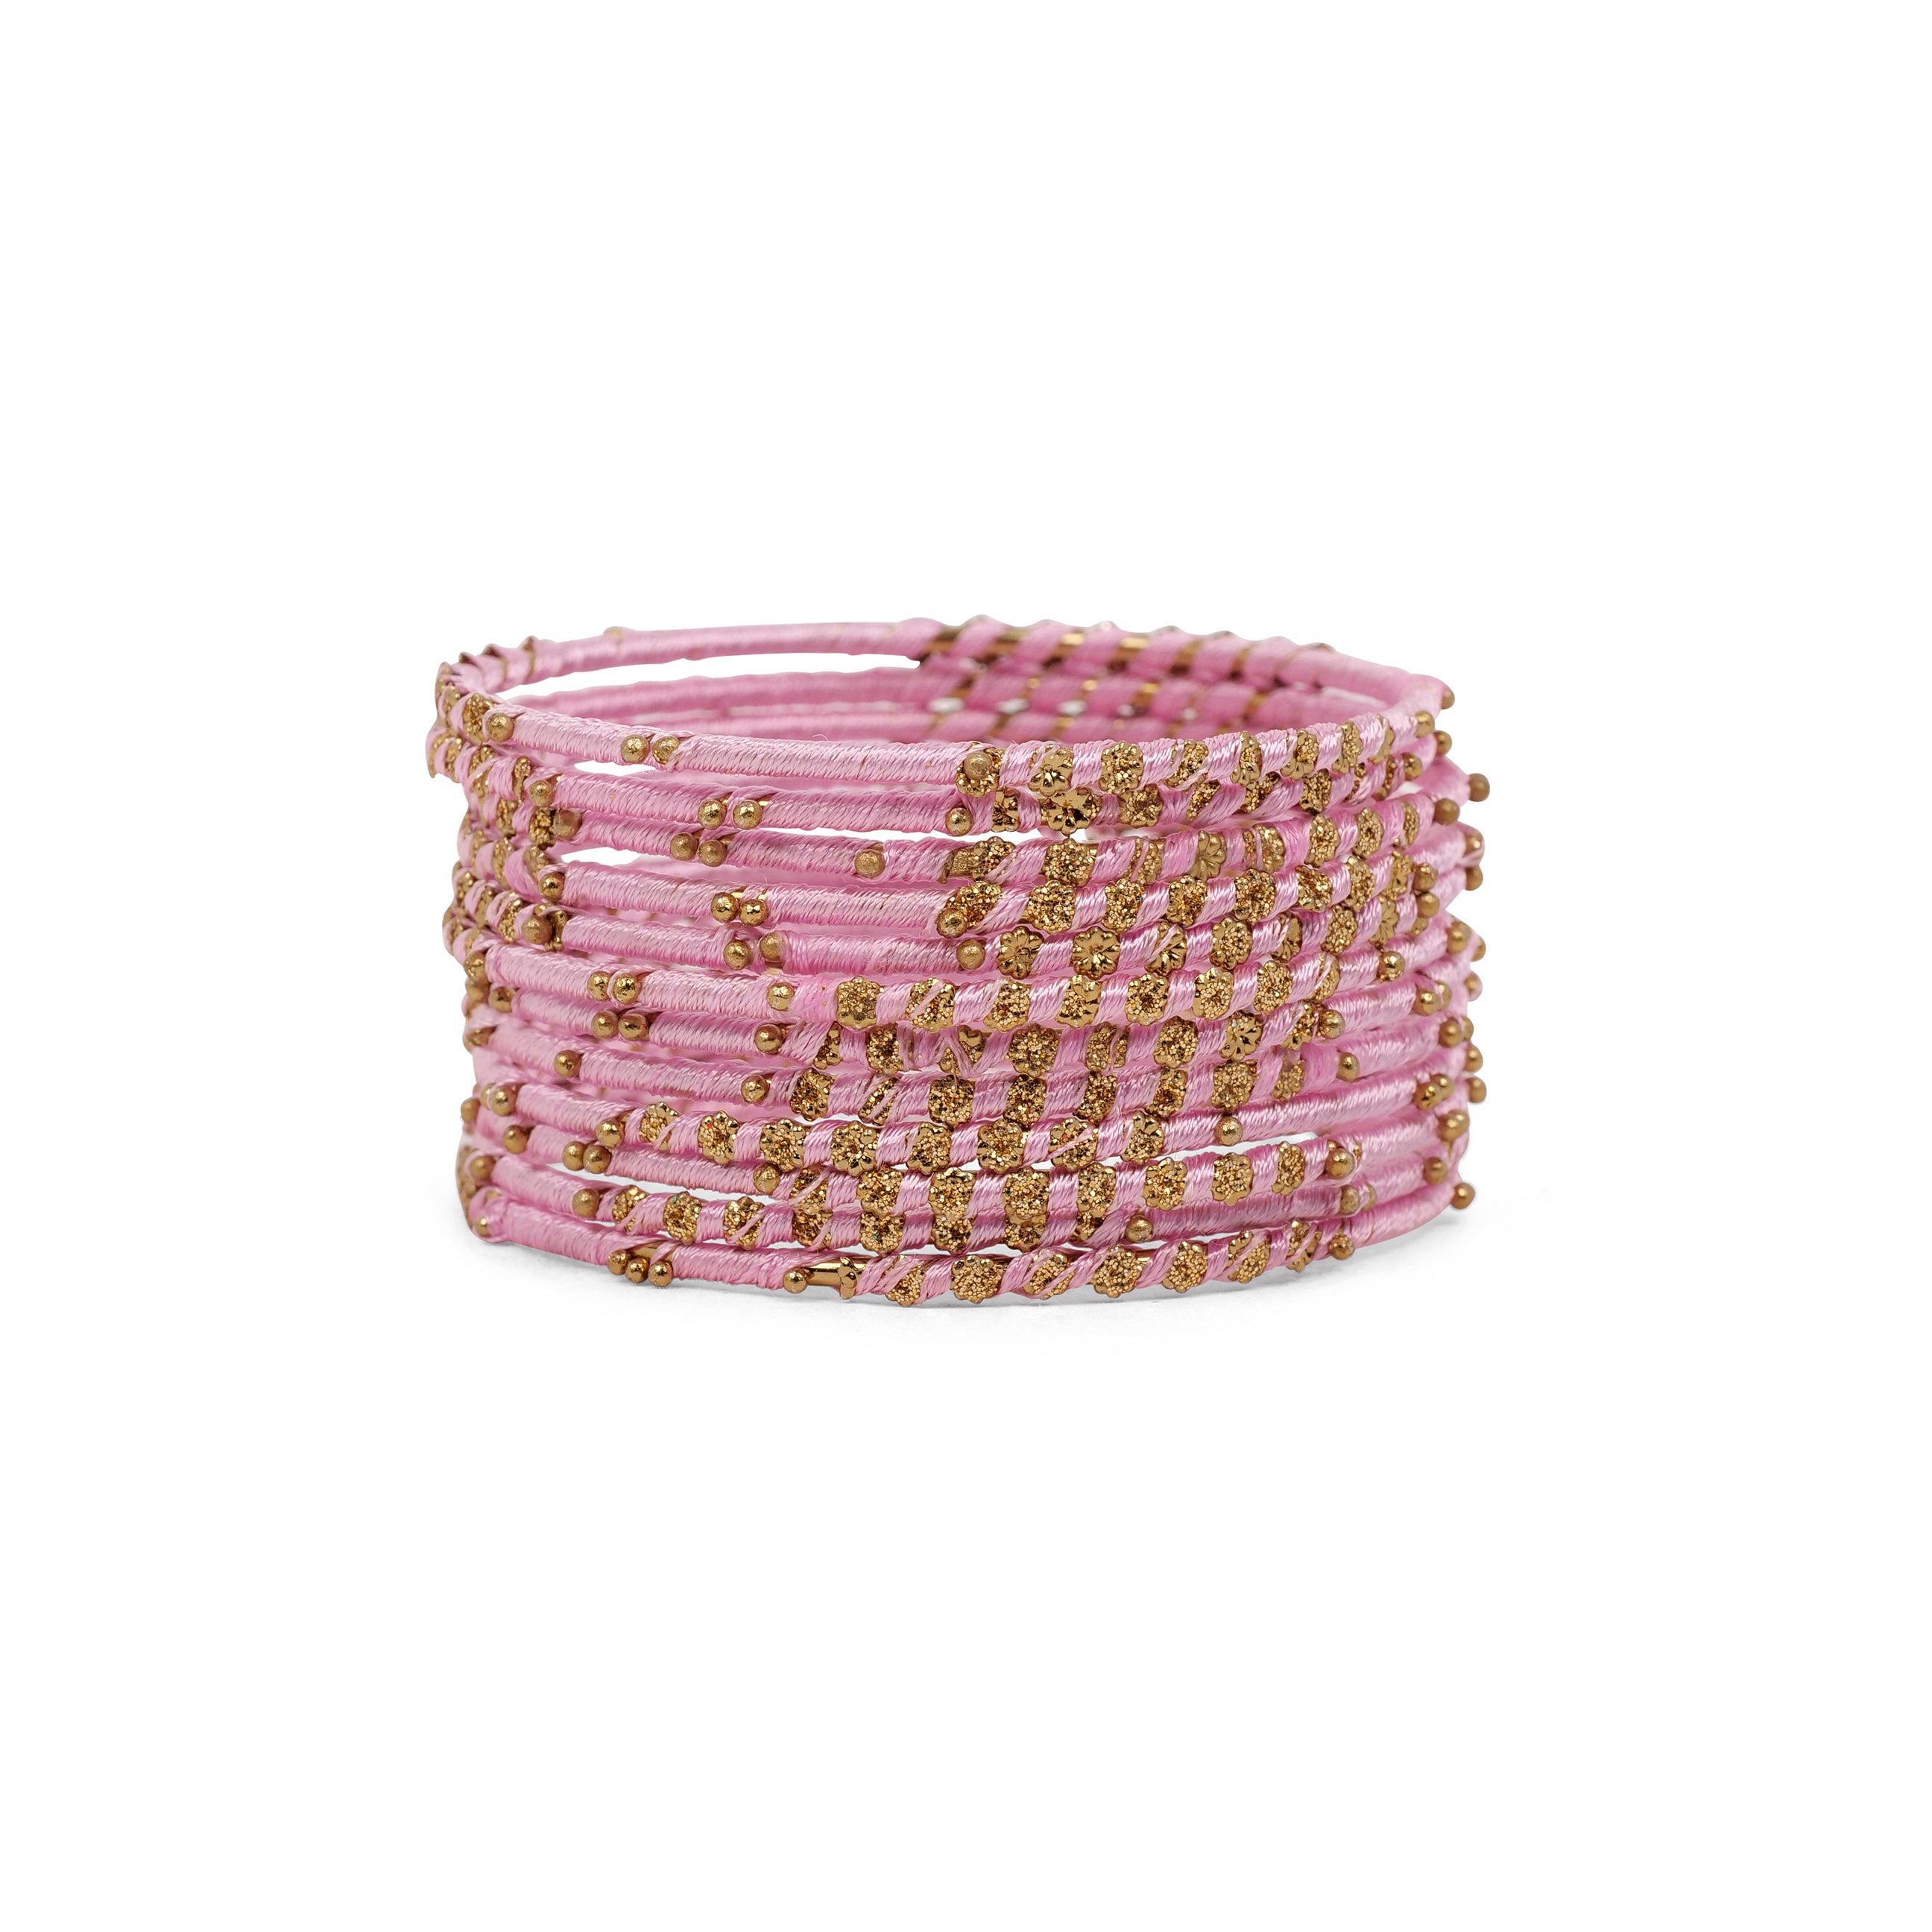 Set of 12 Floral Thead Bangles in Pink